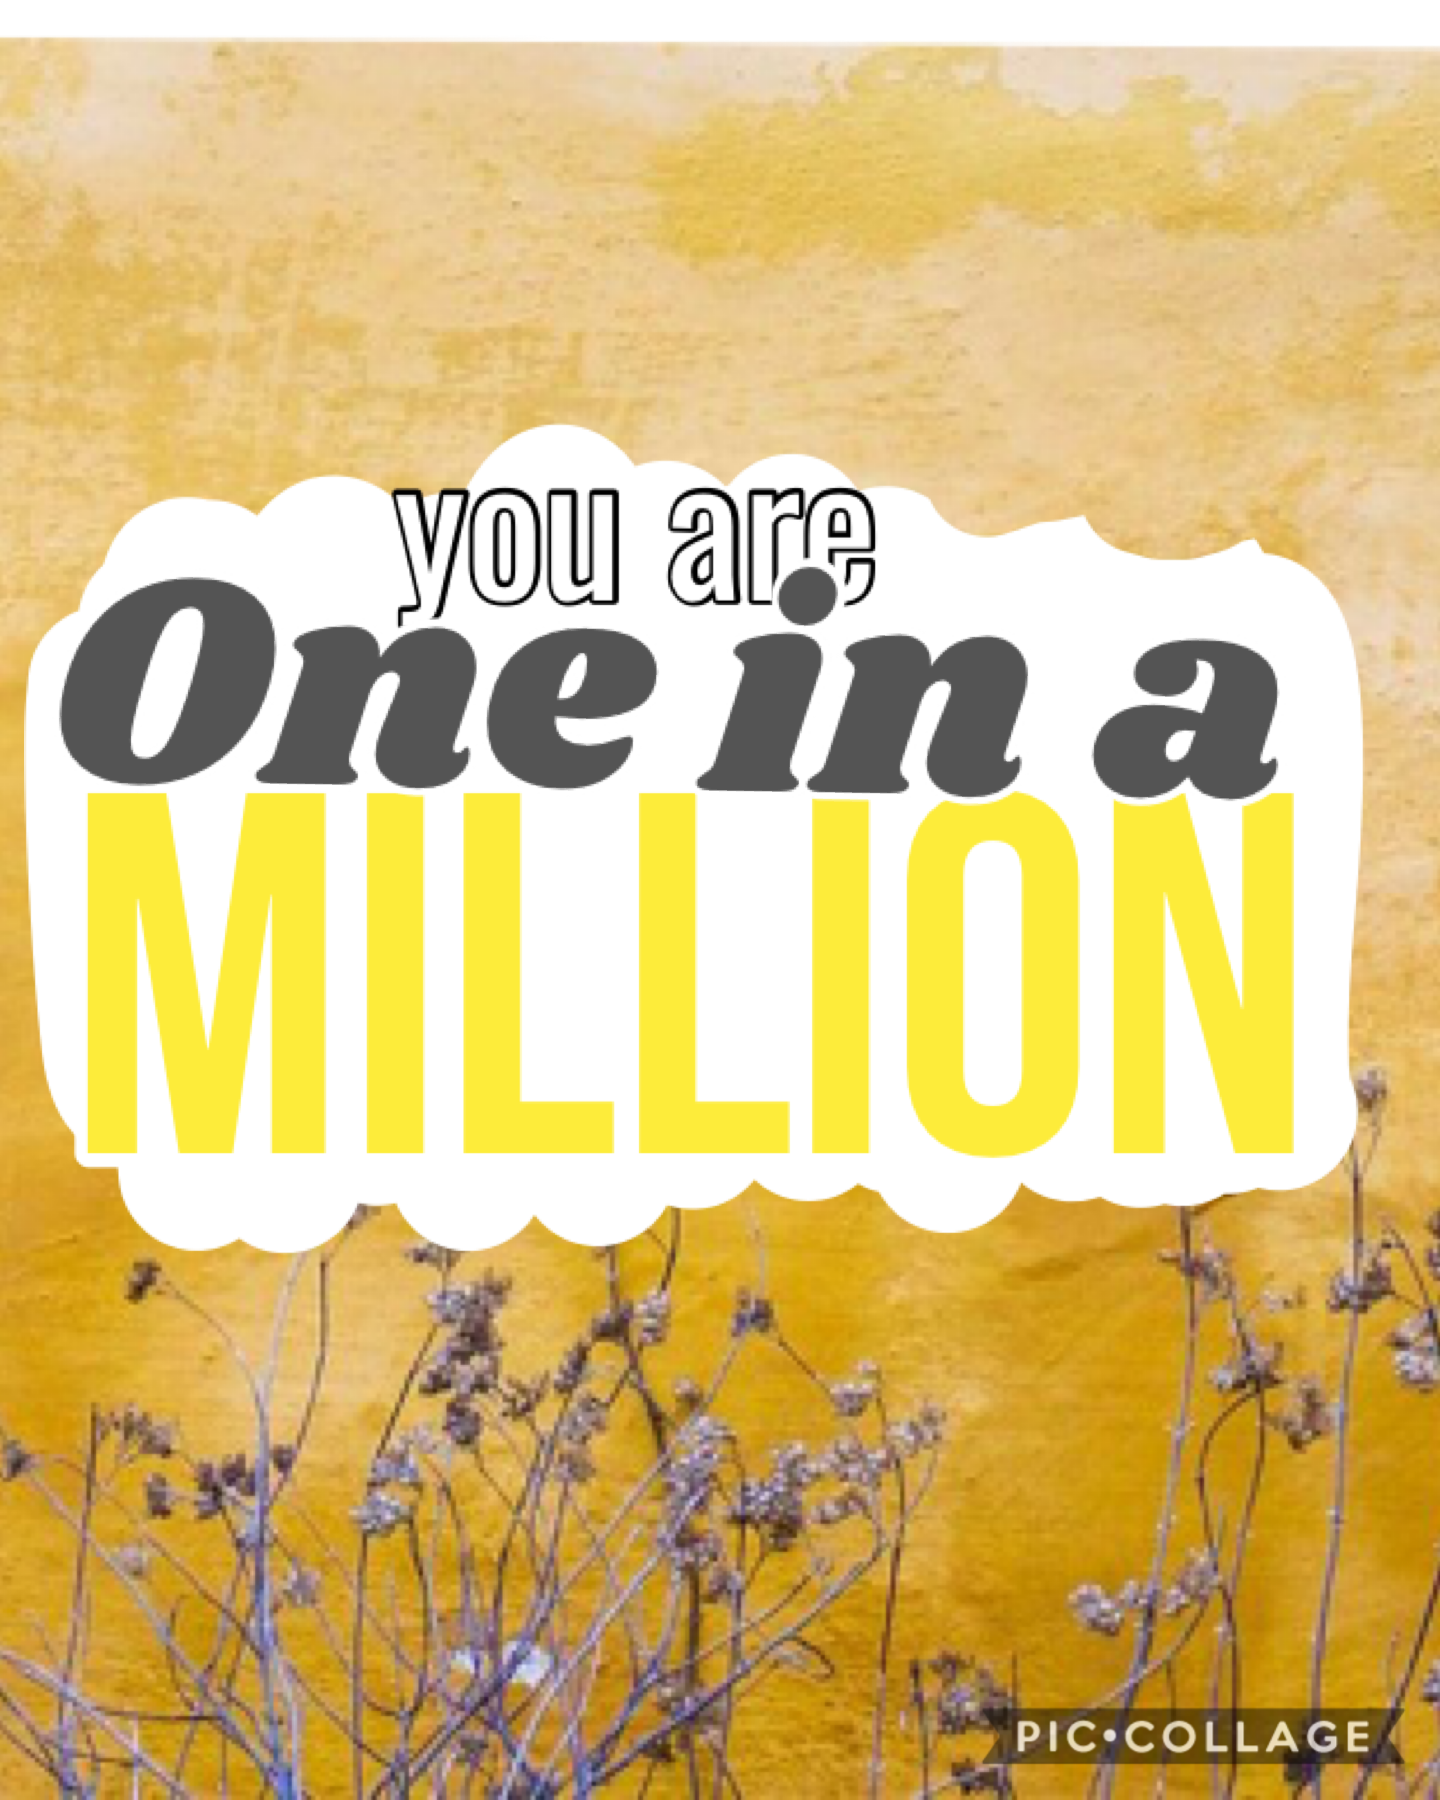 You are one in a million